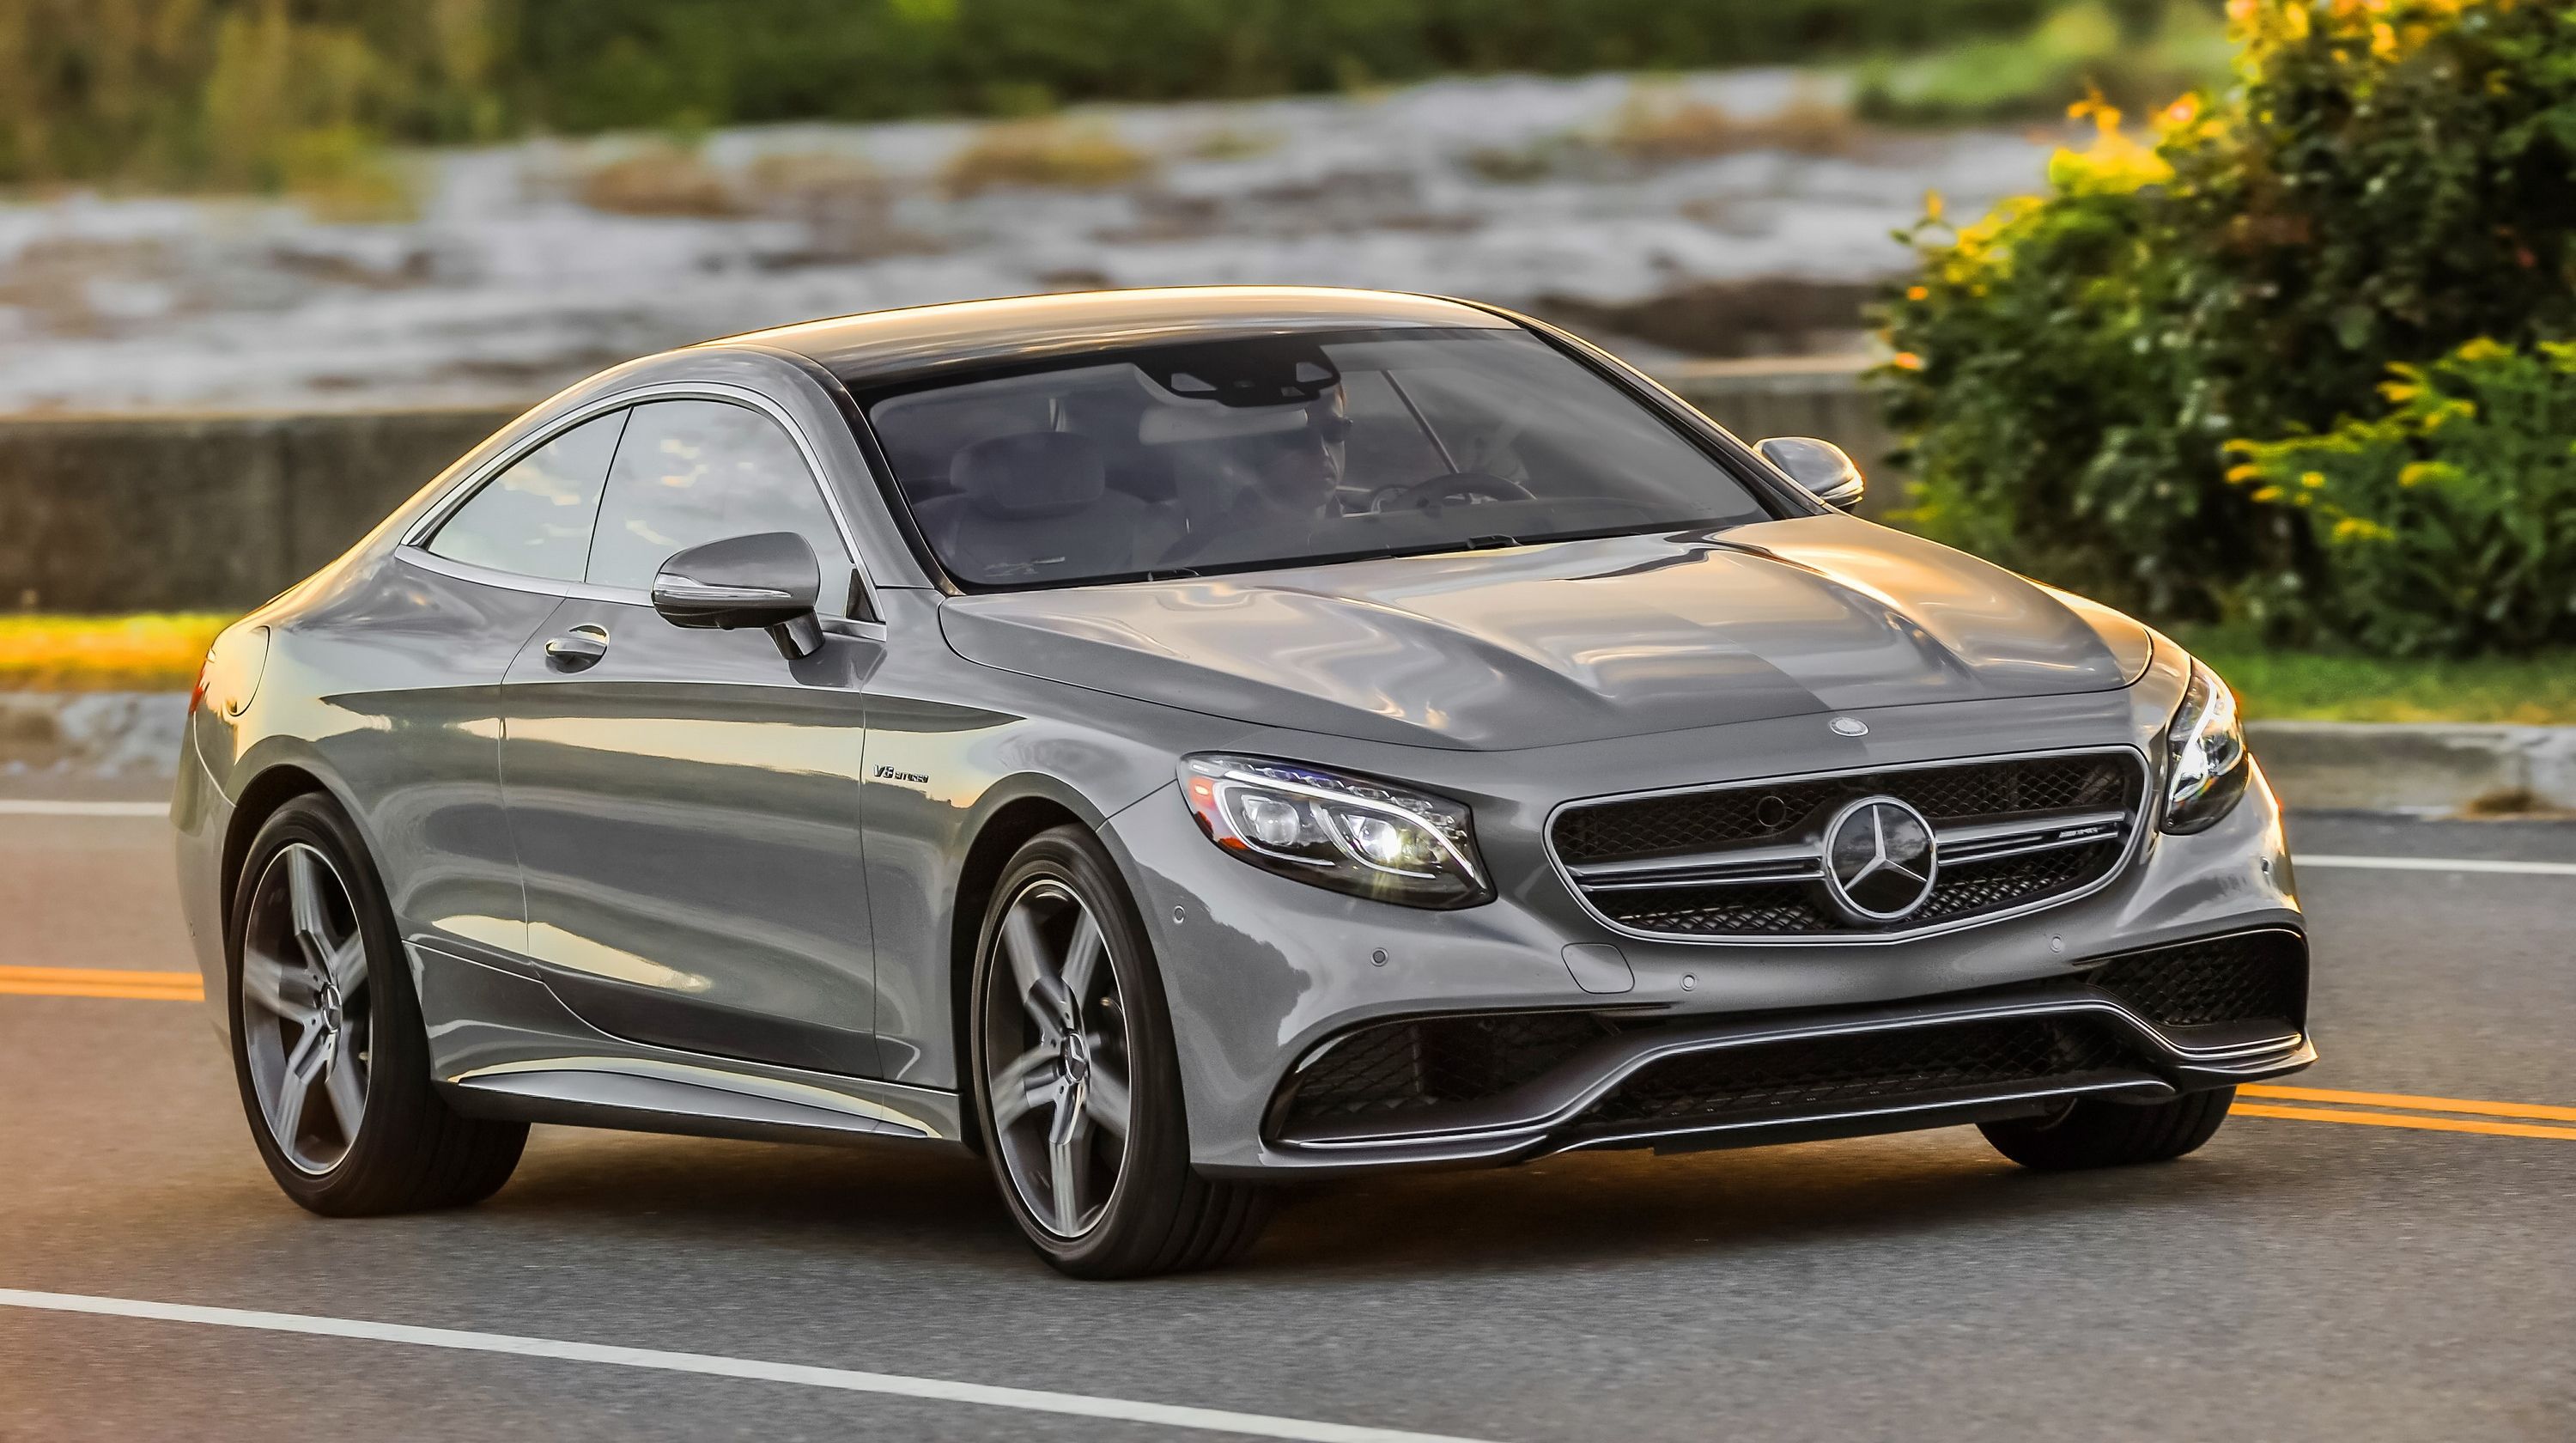  Production of the Mercedes-Benz S63 AMG is kicking of with a specal 